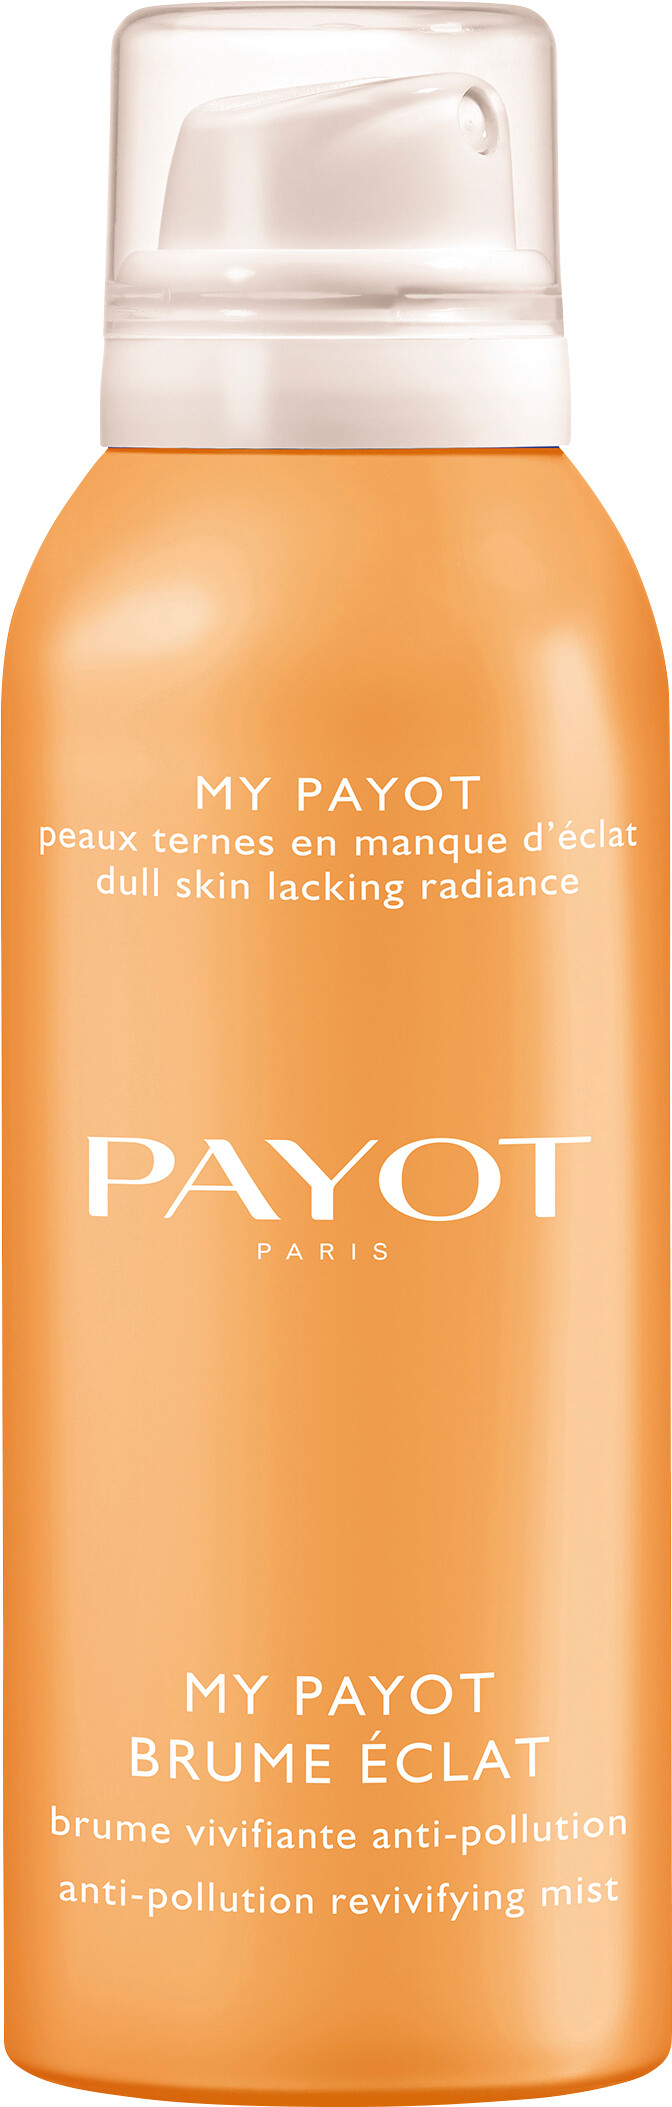 PAYOT My PAYOT Brume Eclat - Anti-Pollution Revivifying Mist 125ml